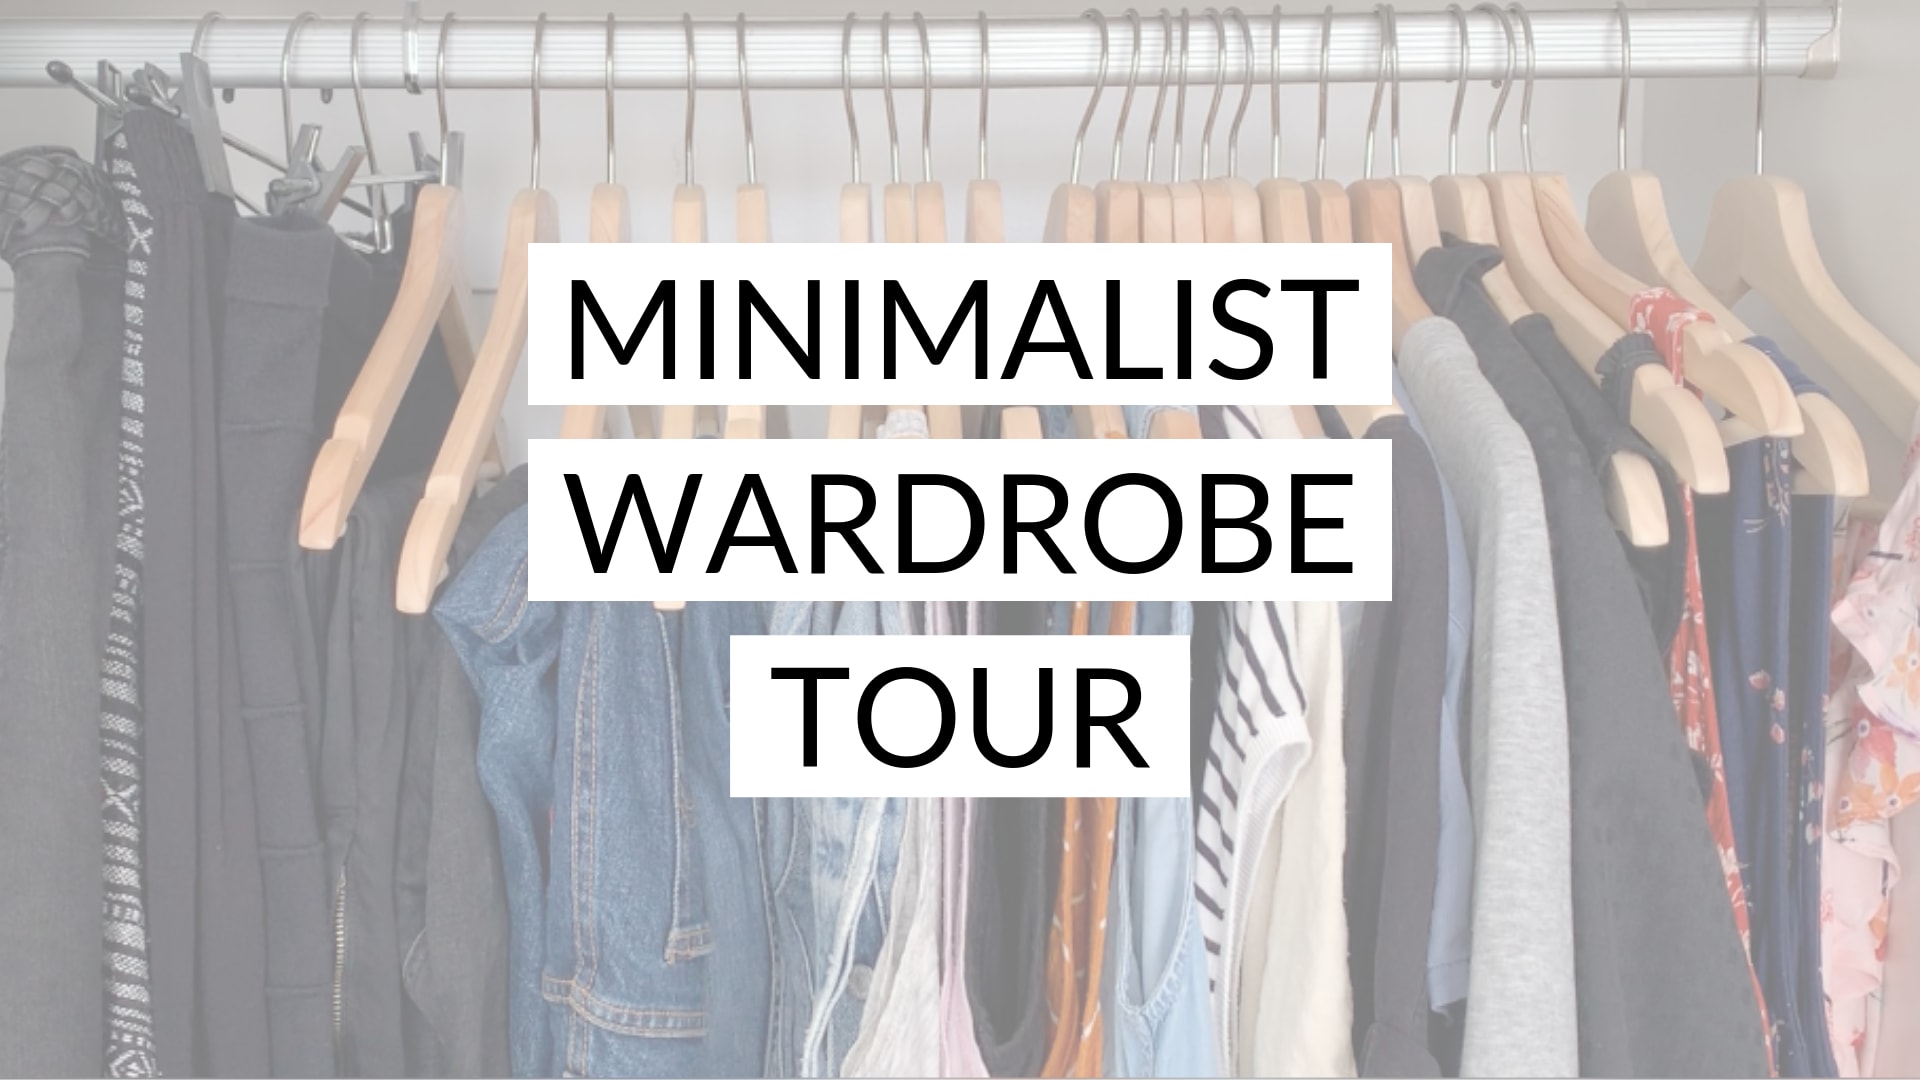 The Minimalist - DAY 8 #MINIMALISM - What's WARDROBE ESSENTIALS⁉️ 👉 It  refers to #core #clothing items which form the #foundation of your #closet  - Basics that you can #mix & #match